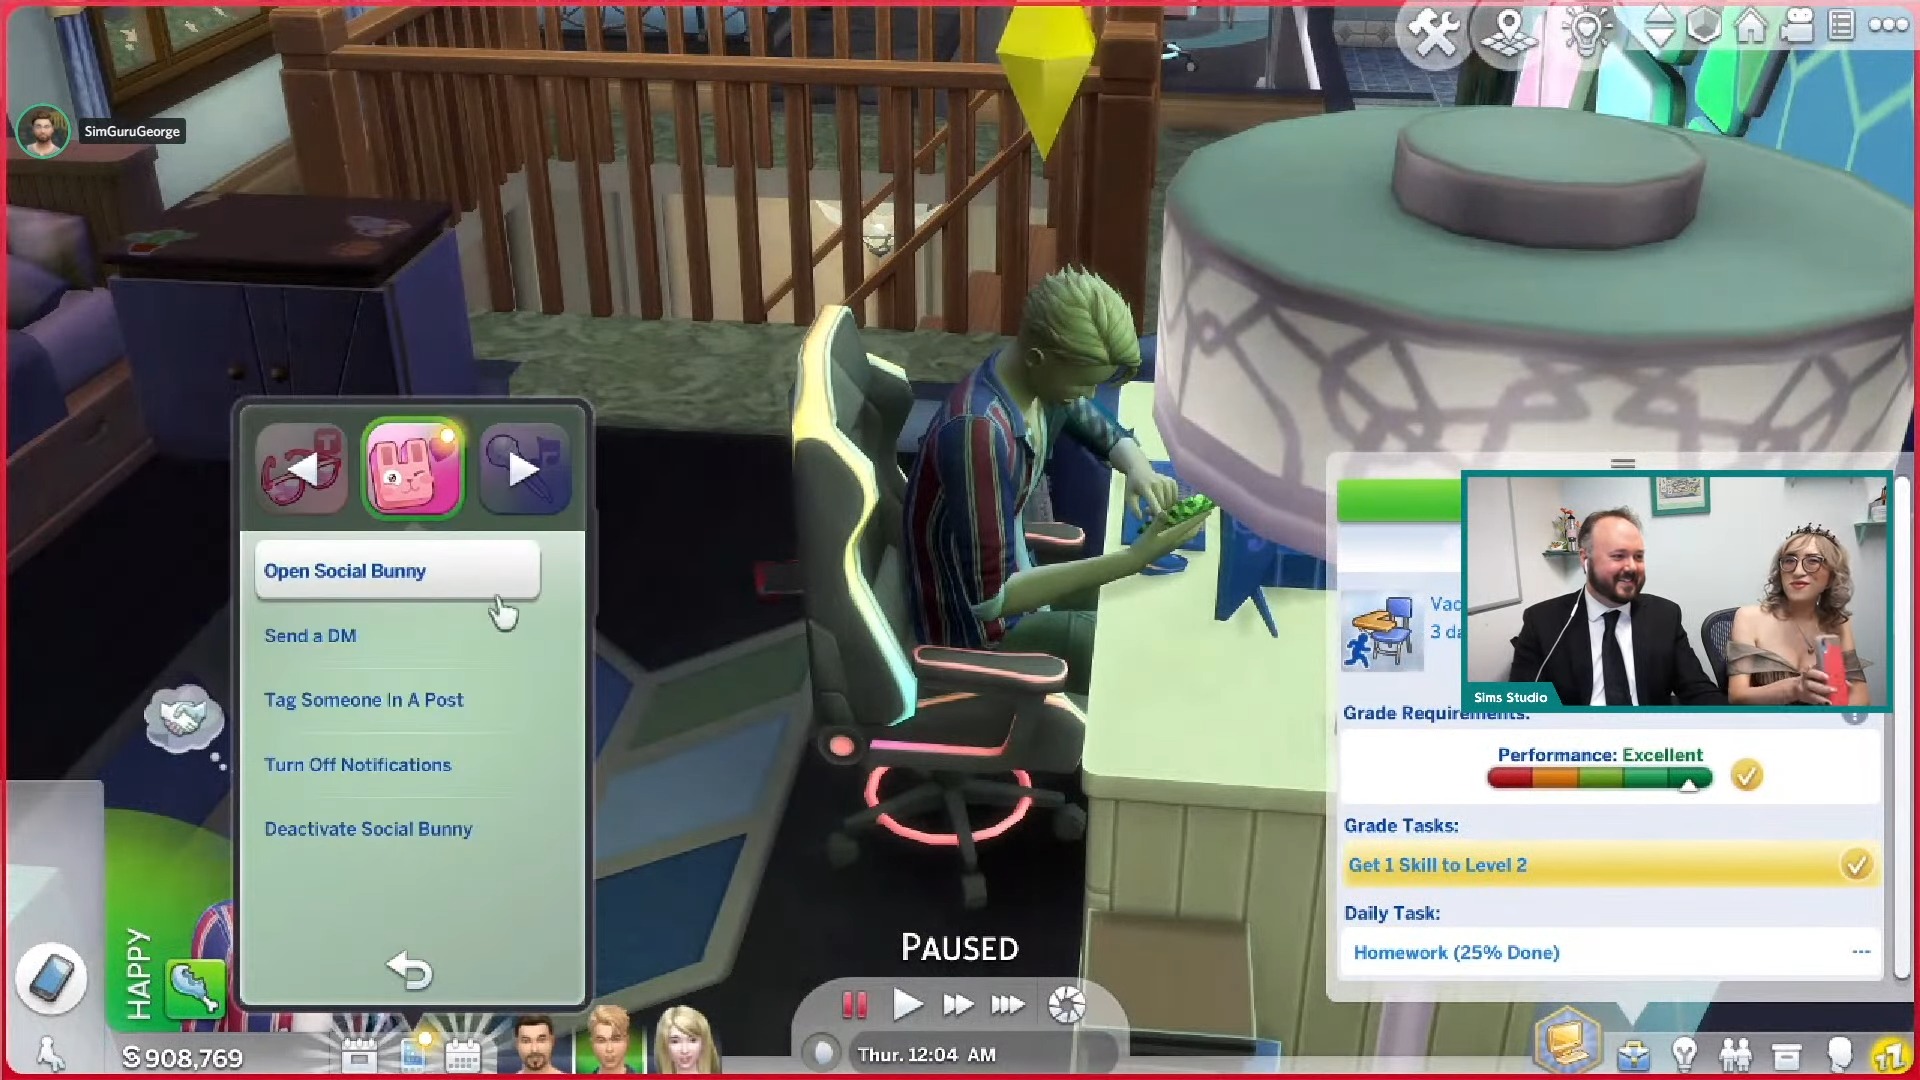 The Sims 4 High School Years Livestream - New Mobile Phone Interface - Open Social Bunny (Available when there's a Notification)